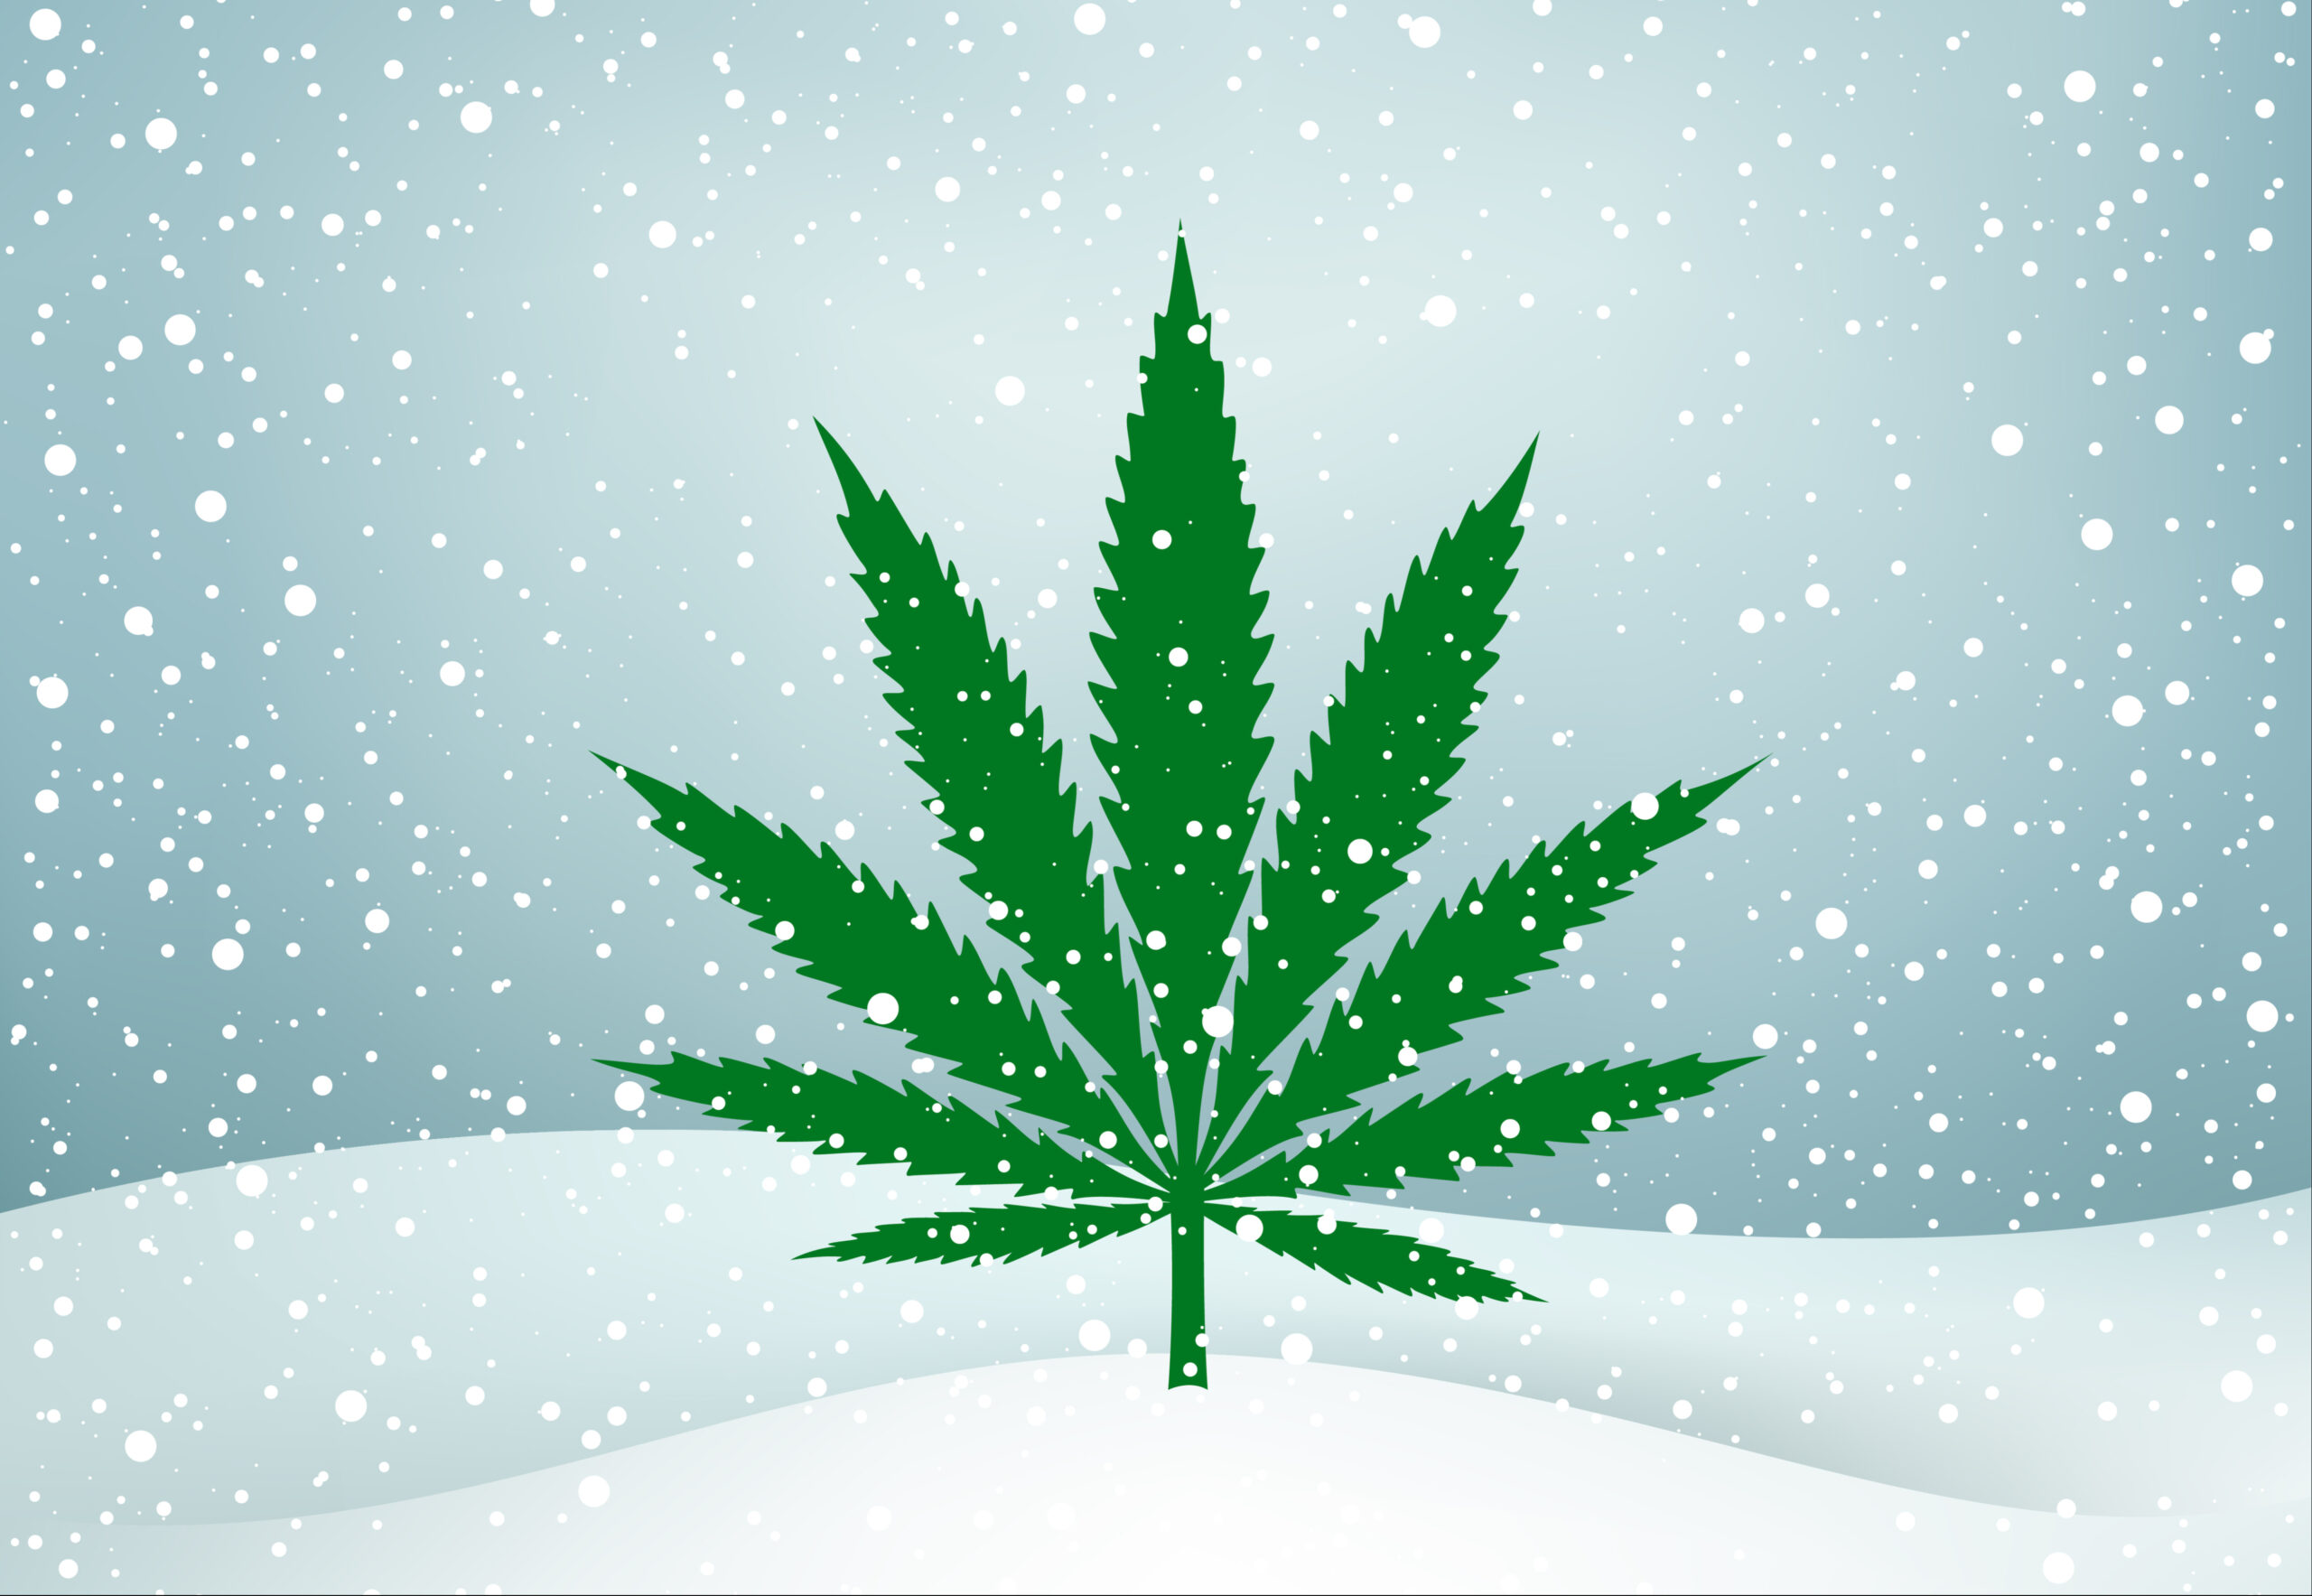 Cozy cannabis picks: Products to try while snuggling up this snowy weekend